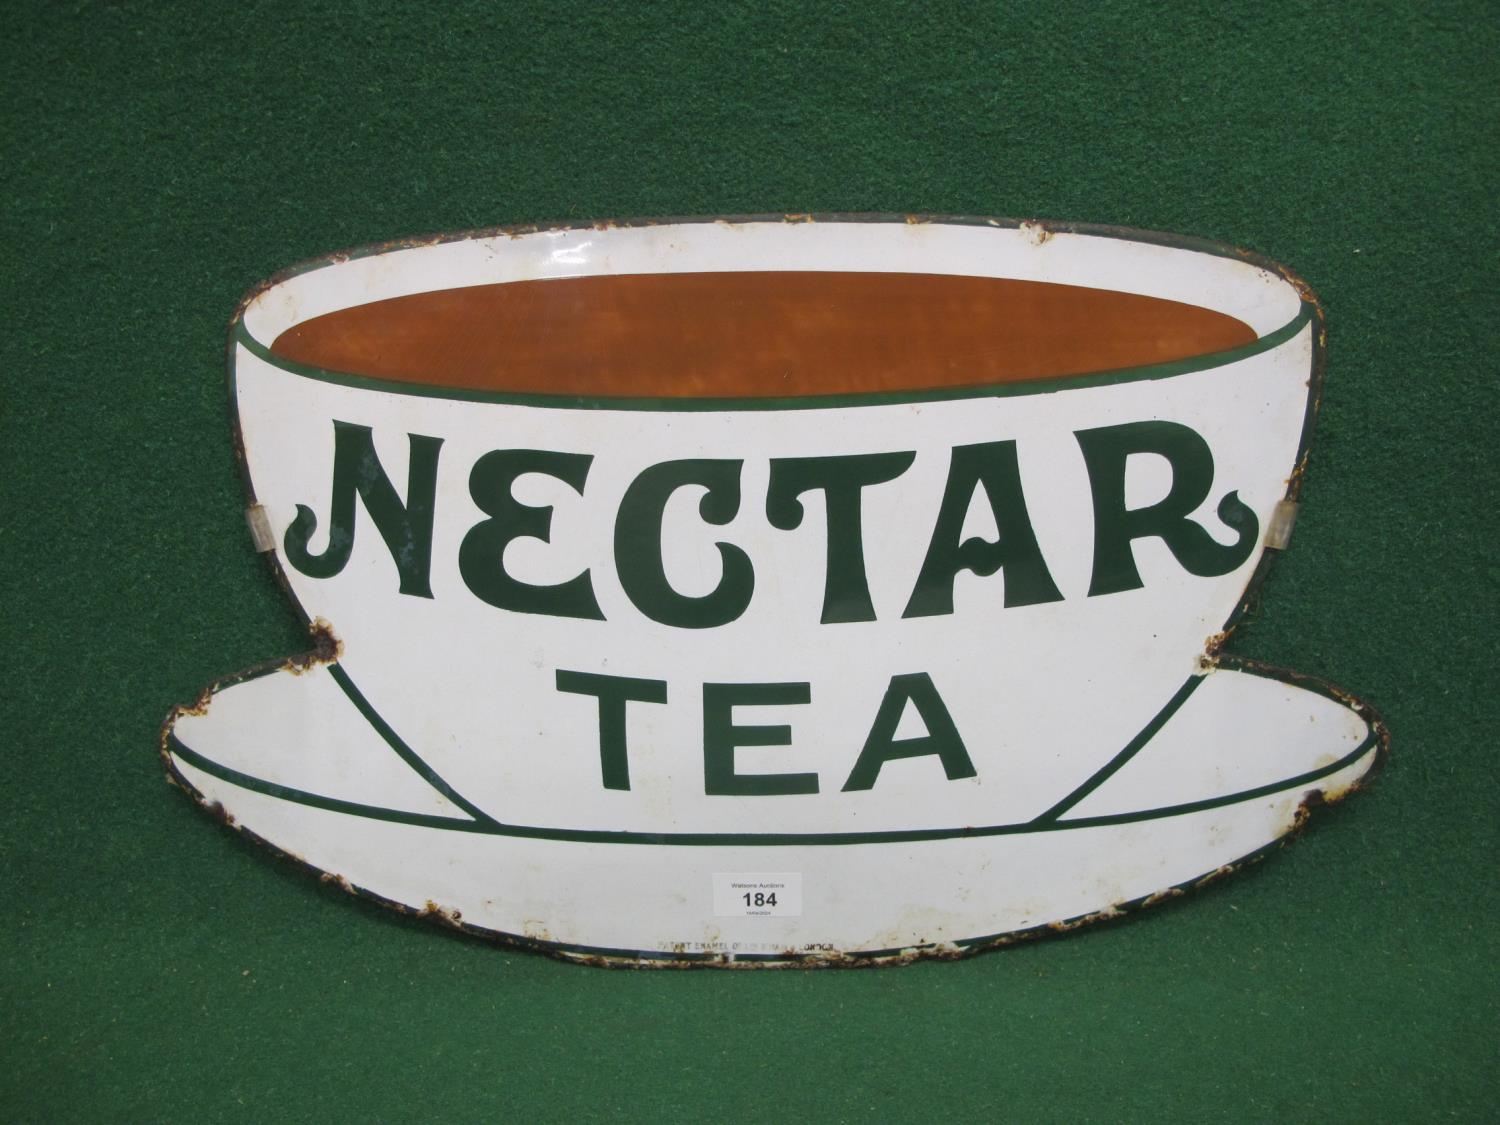 Cup and saucer shaped enamel advertising sign for Nectar Tea, green letters and brown tea on a white